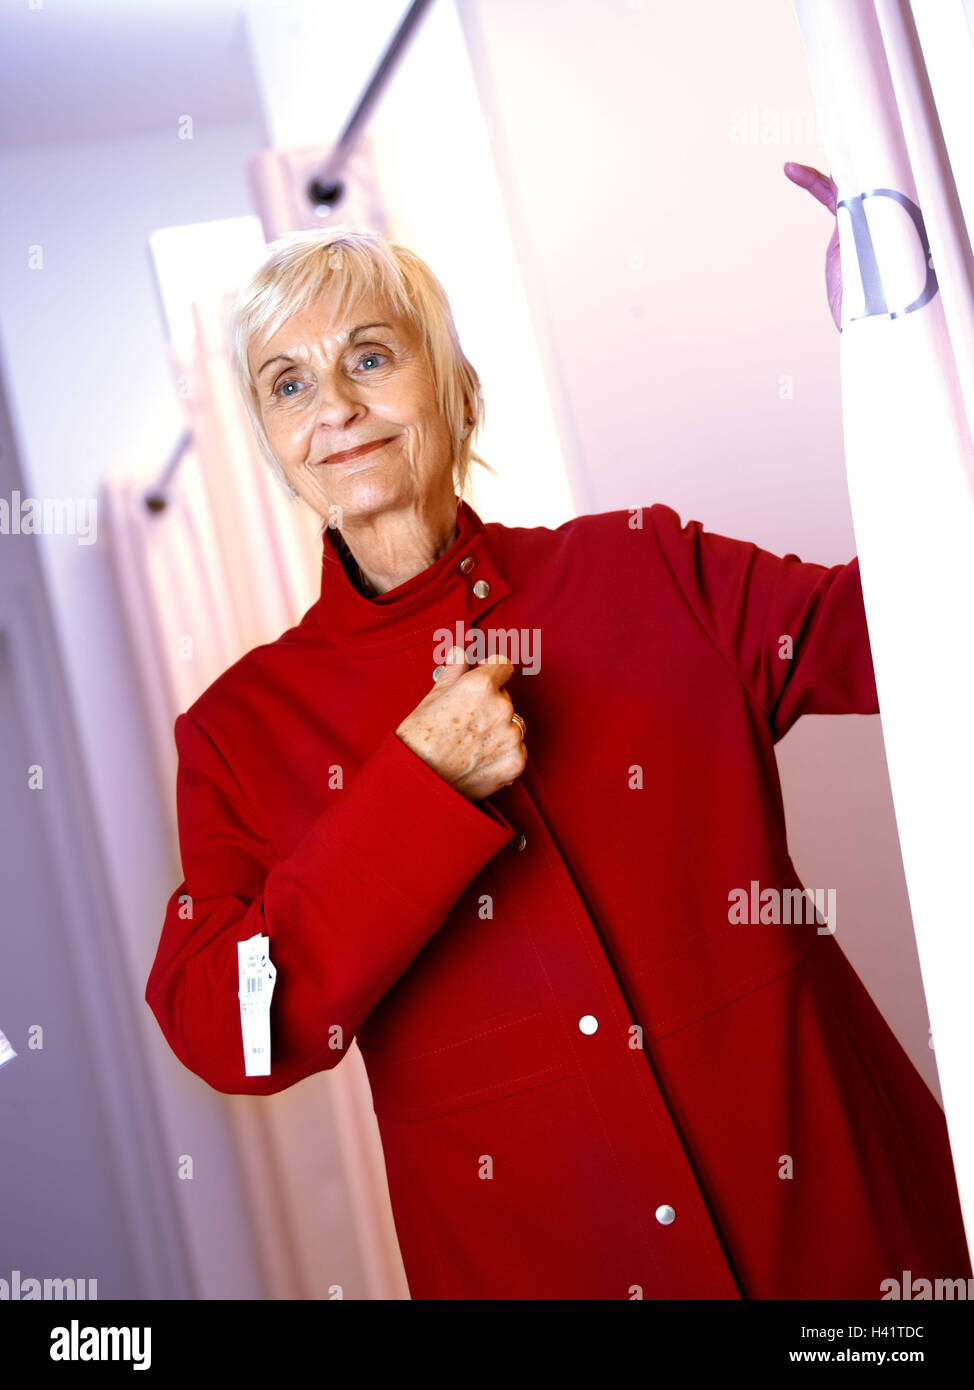 Boutique, senior, woman, jacket red, try, smile, half portrait, 60-70 years, woman, pensioner, retirement age, old person, Best Age, actively, fit, shopping, shopping, business, shopping tour, business, ladies wear, select, try on, choice, select, shoppin Stock Photo